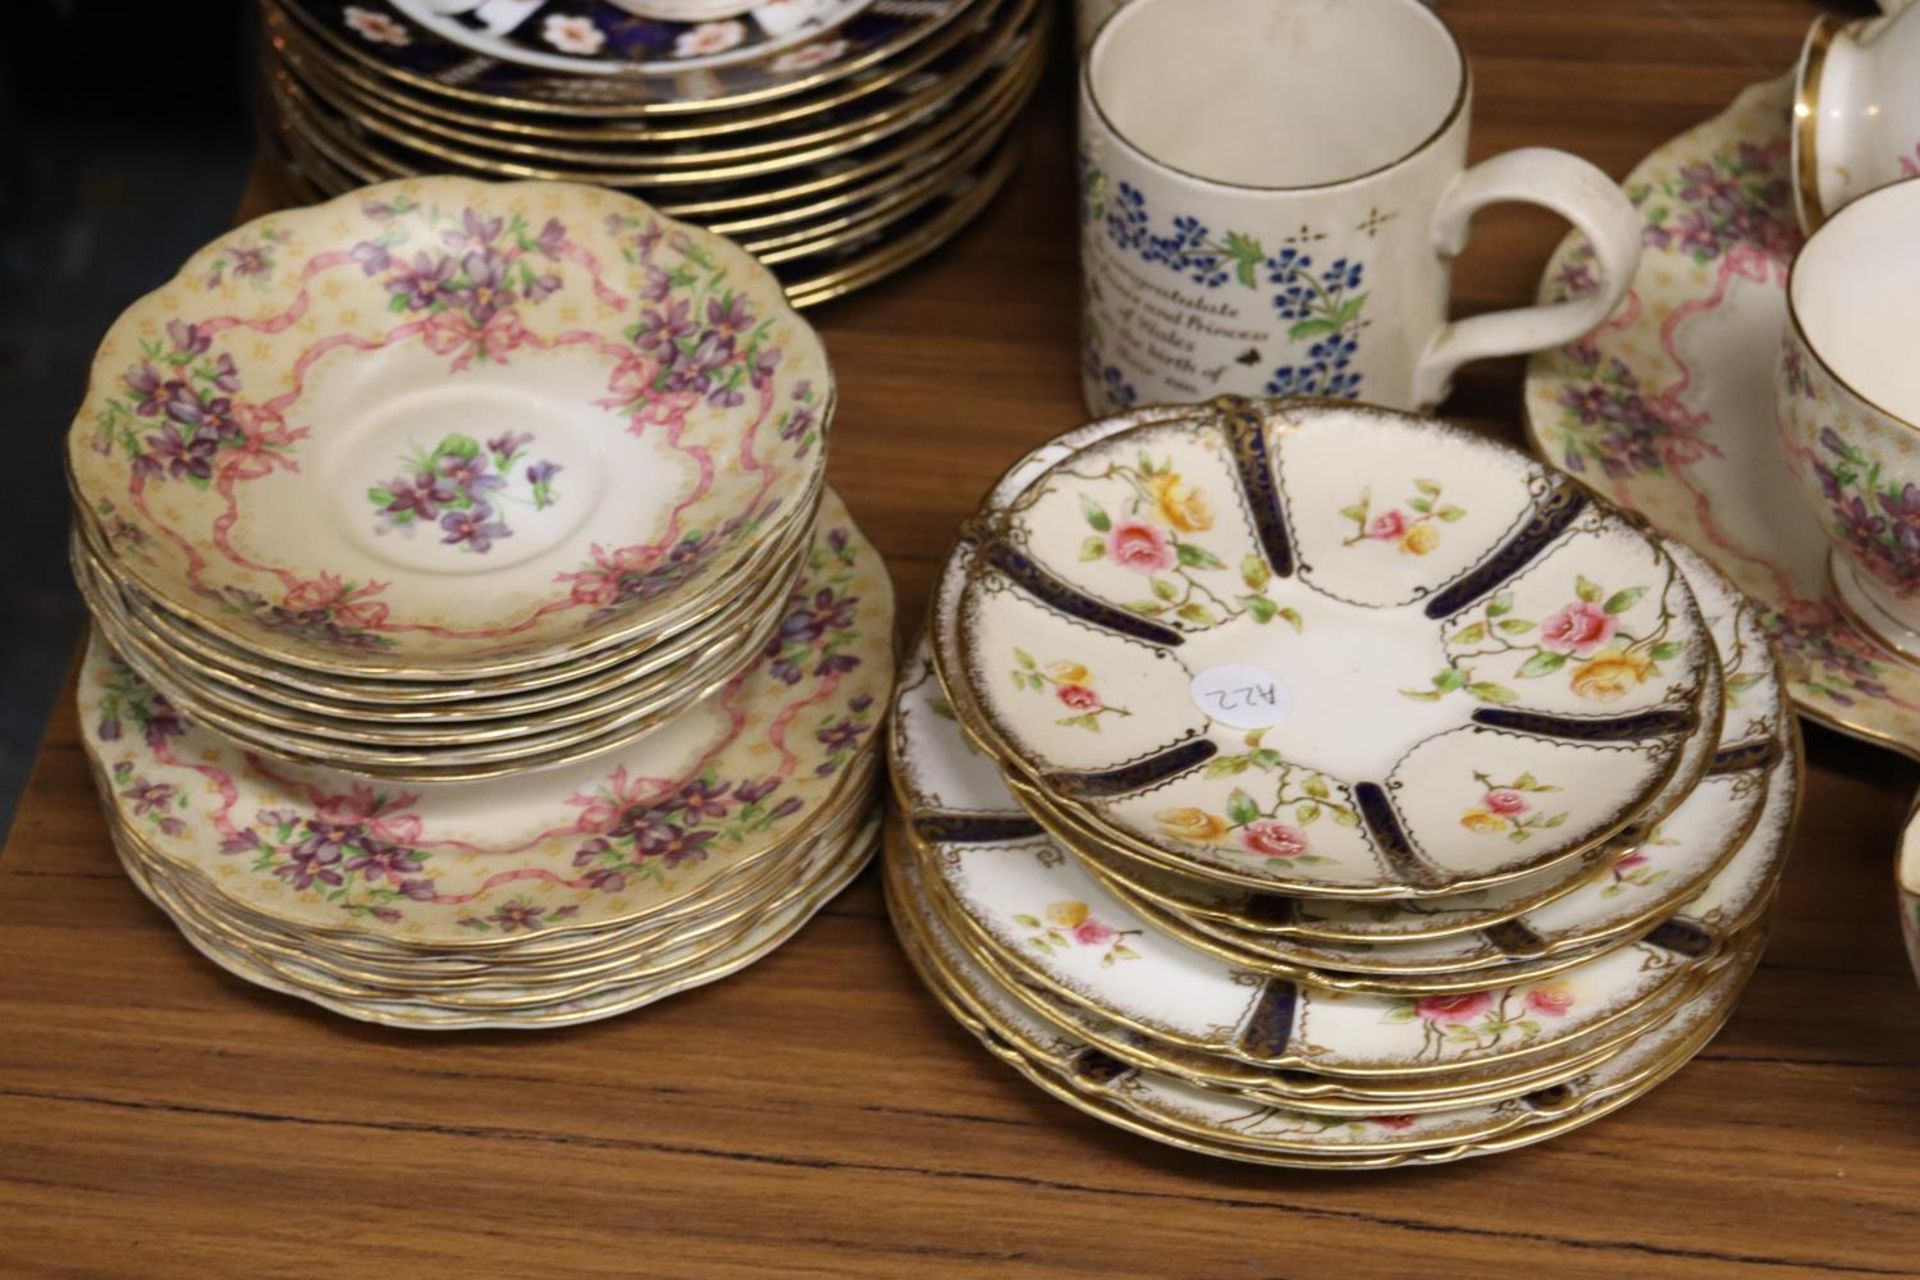 A QUANTITY OF VINTAGE TEAWARE TO INCLUDE QUEEN ANNE, 'SWEET VIOLETS', ETC, CUPS, SAUCERS, SIDE - Image 2 of 5